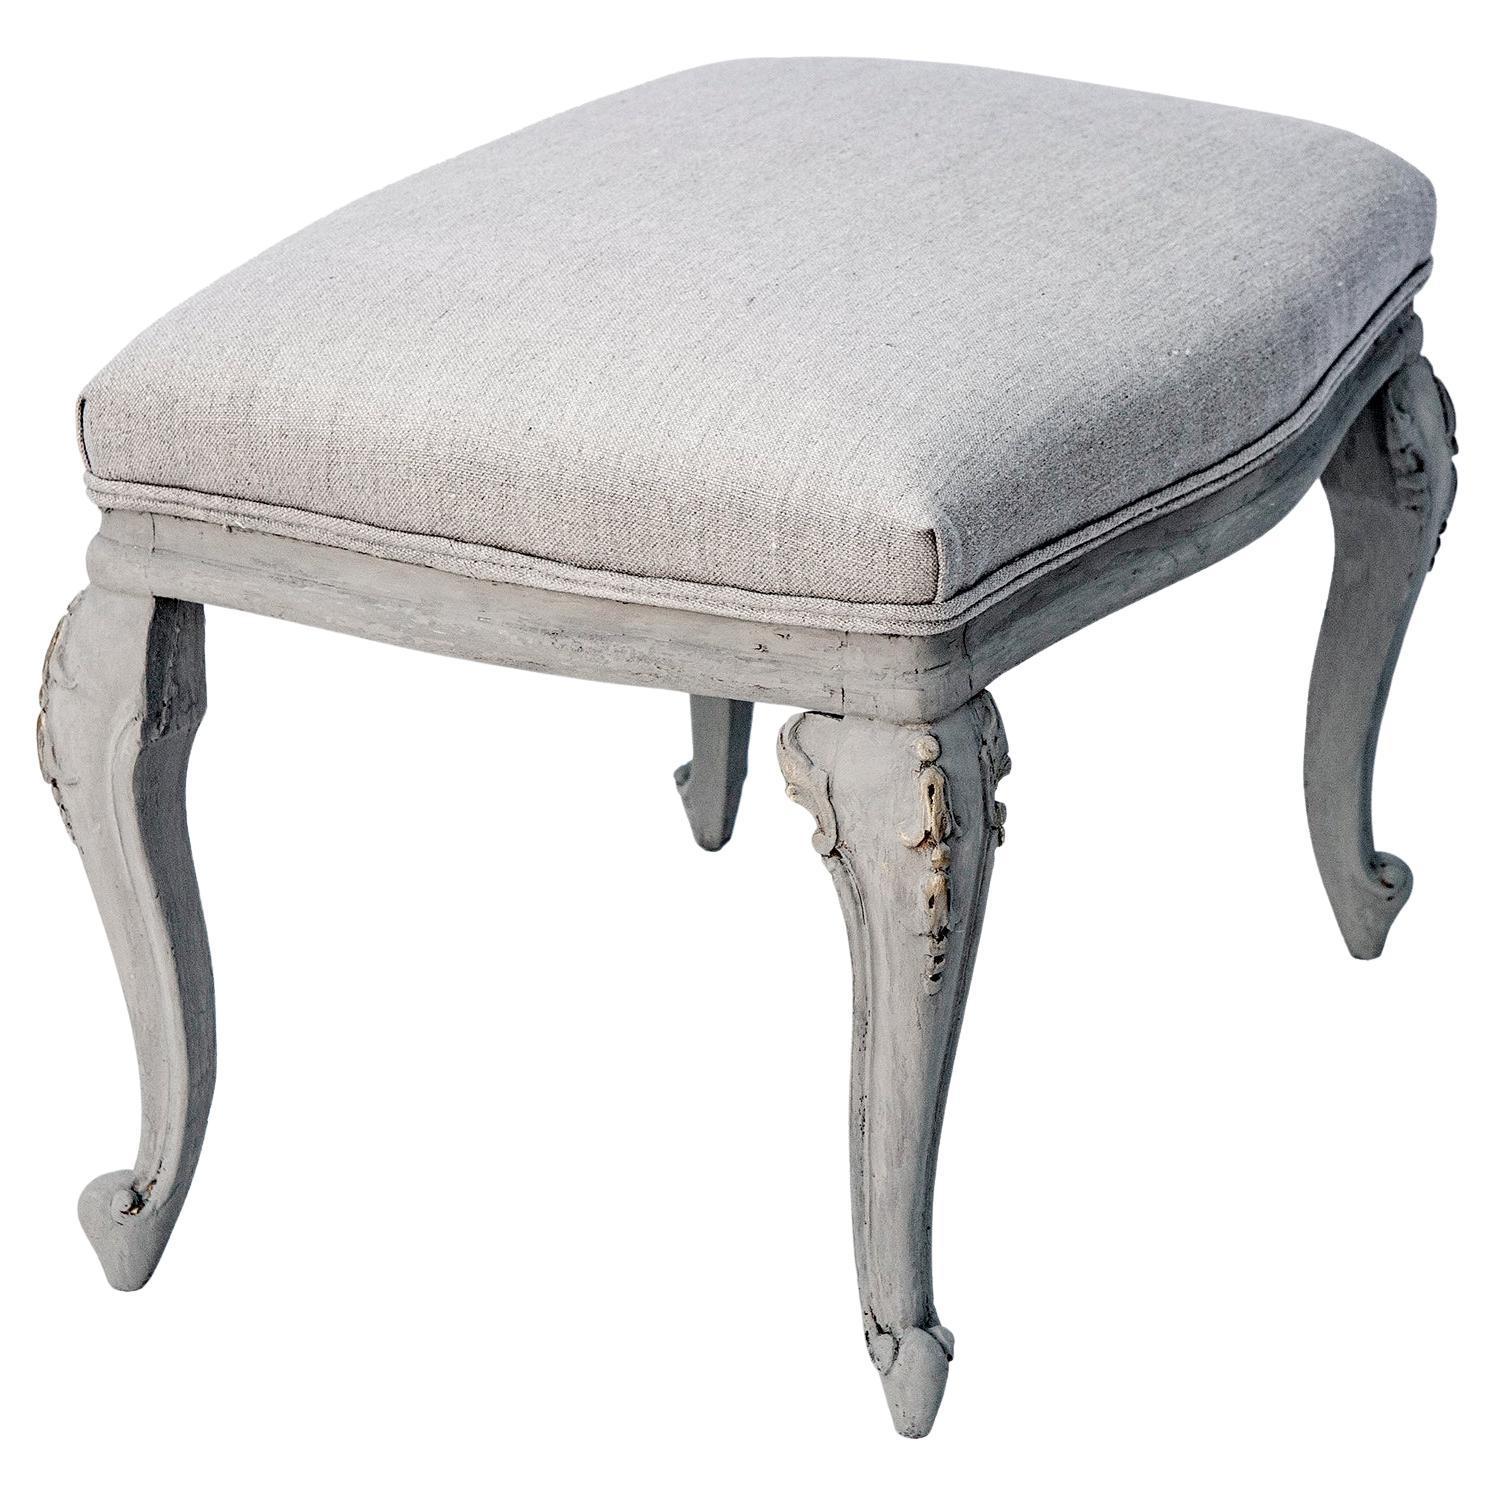 Hand carved Italian dressing table bench.
New upholstery in heavy weight Belgian linen with self-welt.
Gently curved legs hand painted & accented in gold.